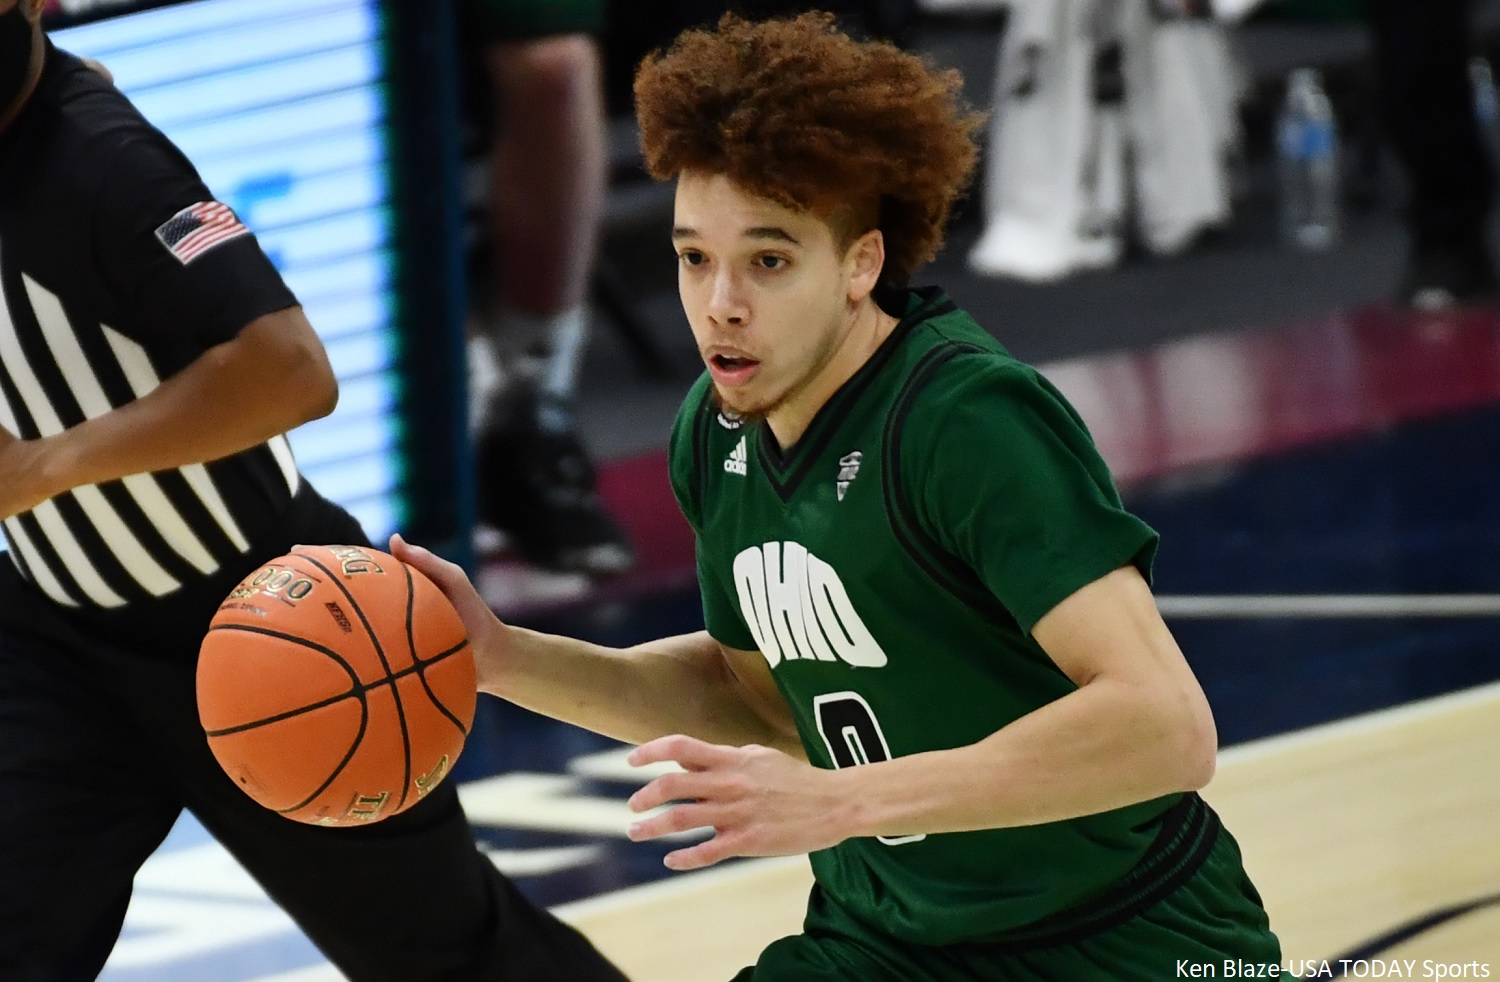 5 possible breakout stars for March Madness